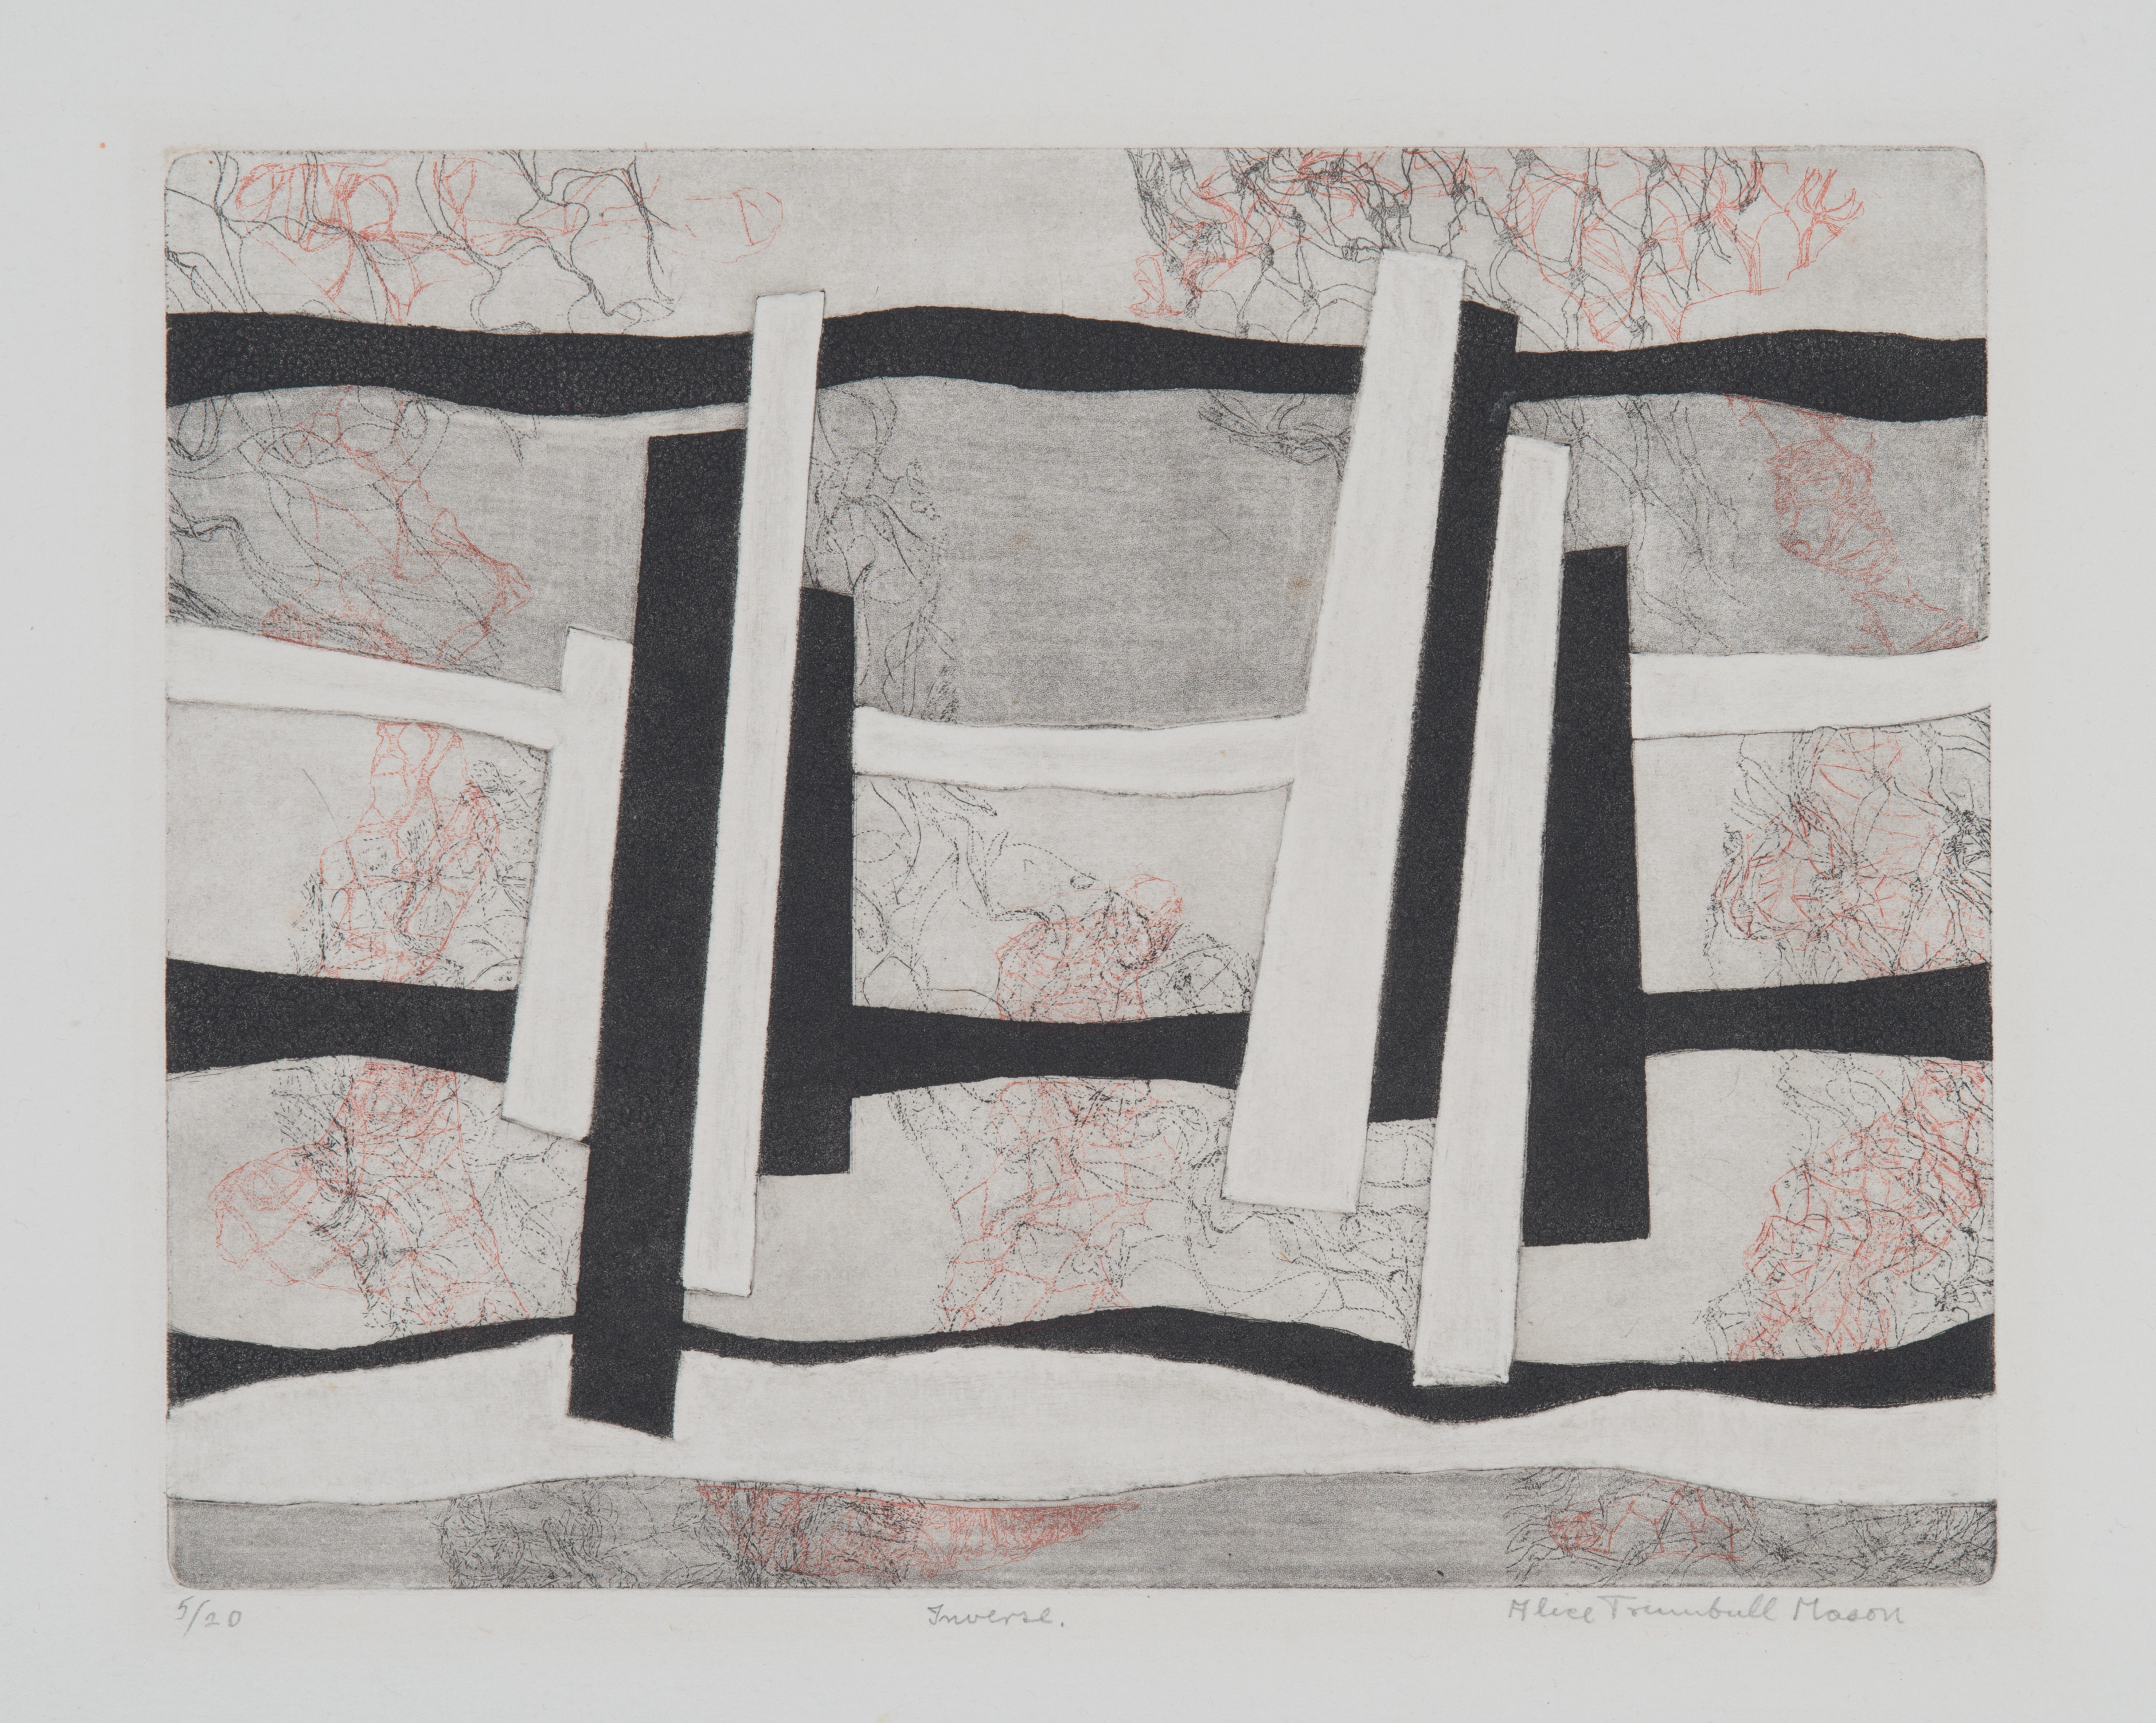 Abstract print on paper, composed of two sets of white and black slanted rectangles in the center, surrounded by wavy, horizontal black and white lines. The back ground is comprised of grey tones, with intermittent net-like, black and red lines.